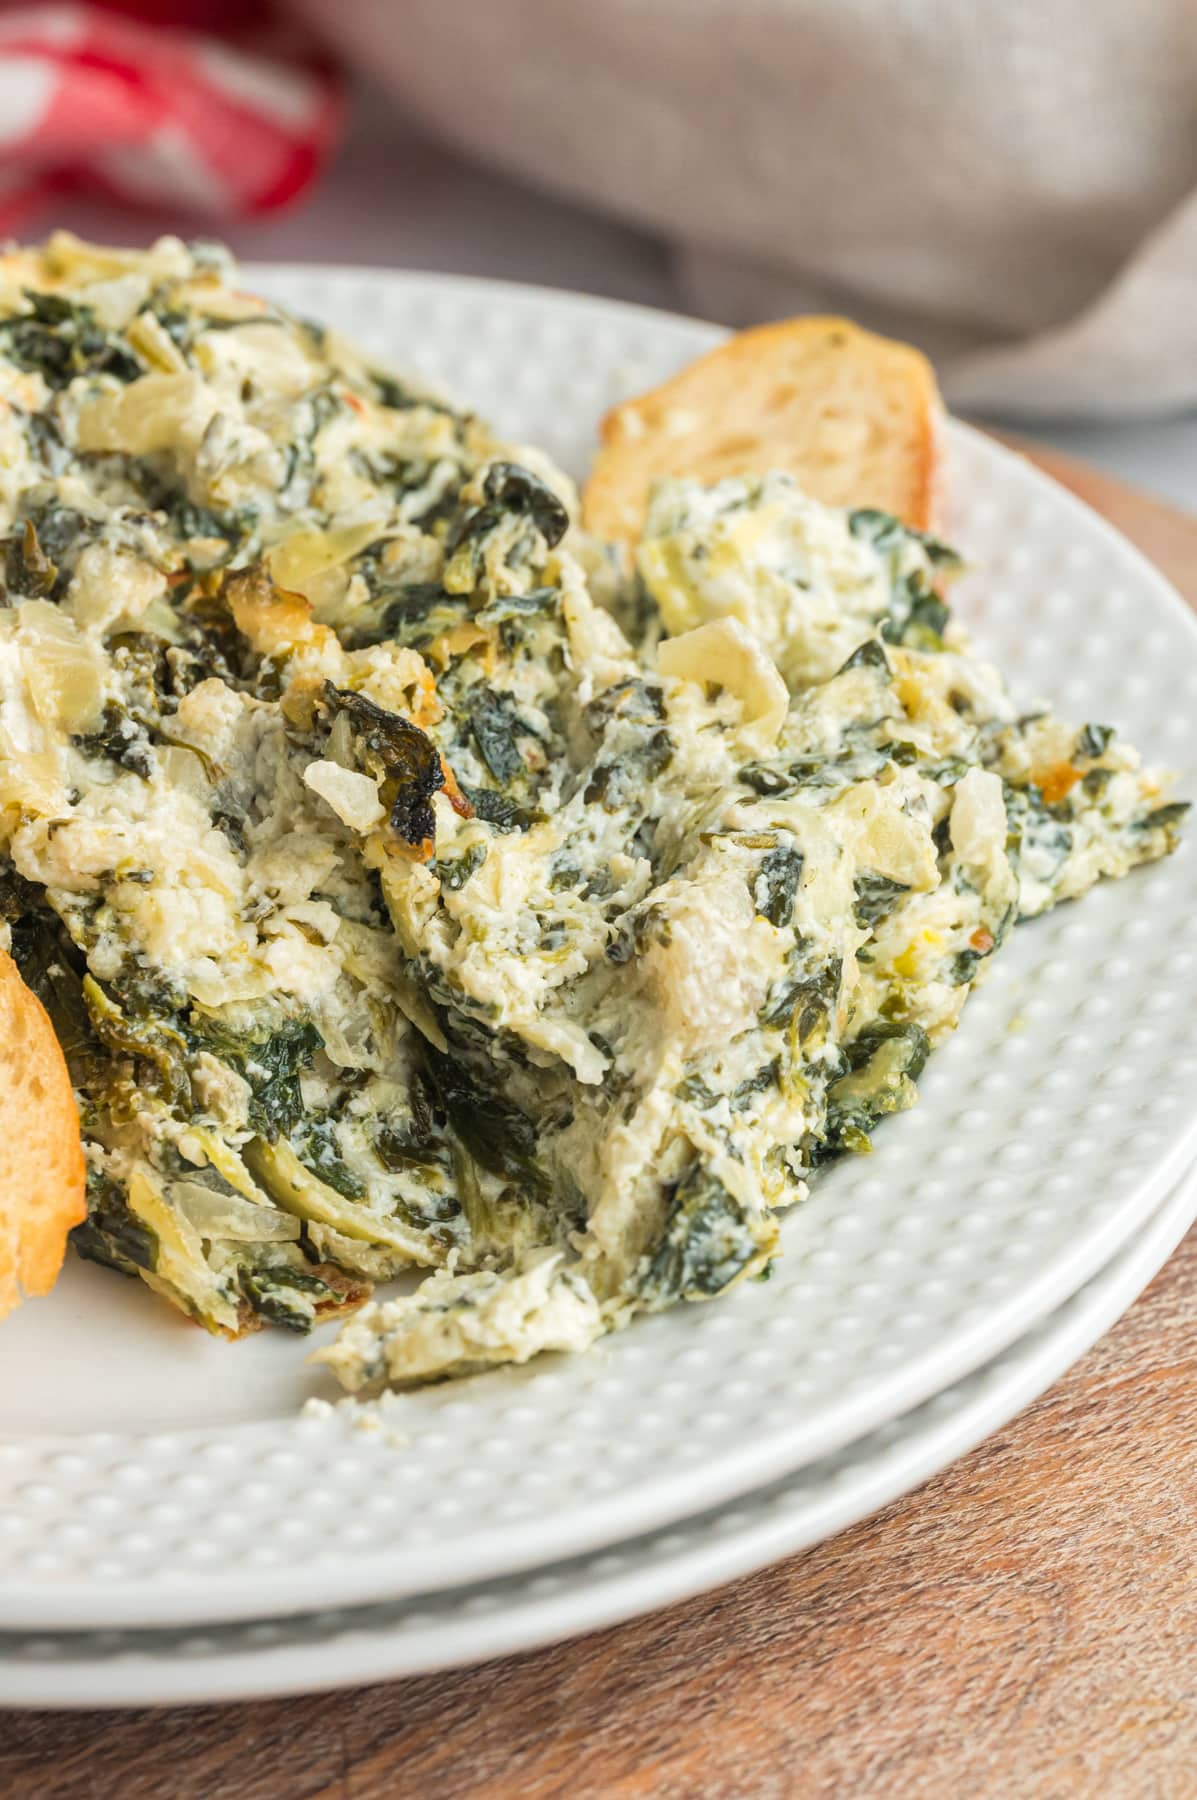 Spinach artichoke dip served on a white plate.